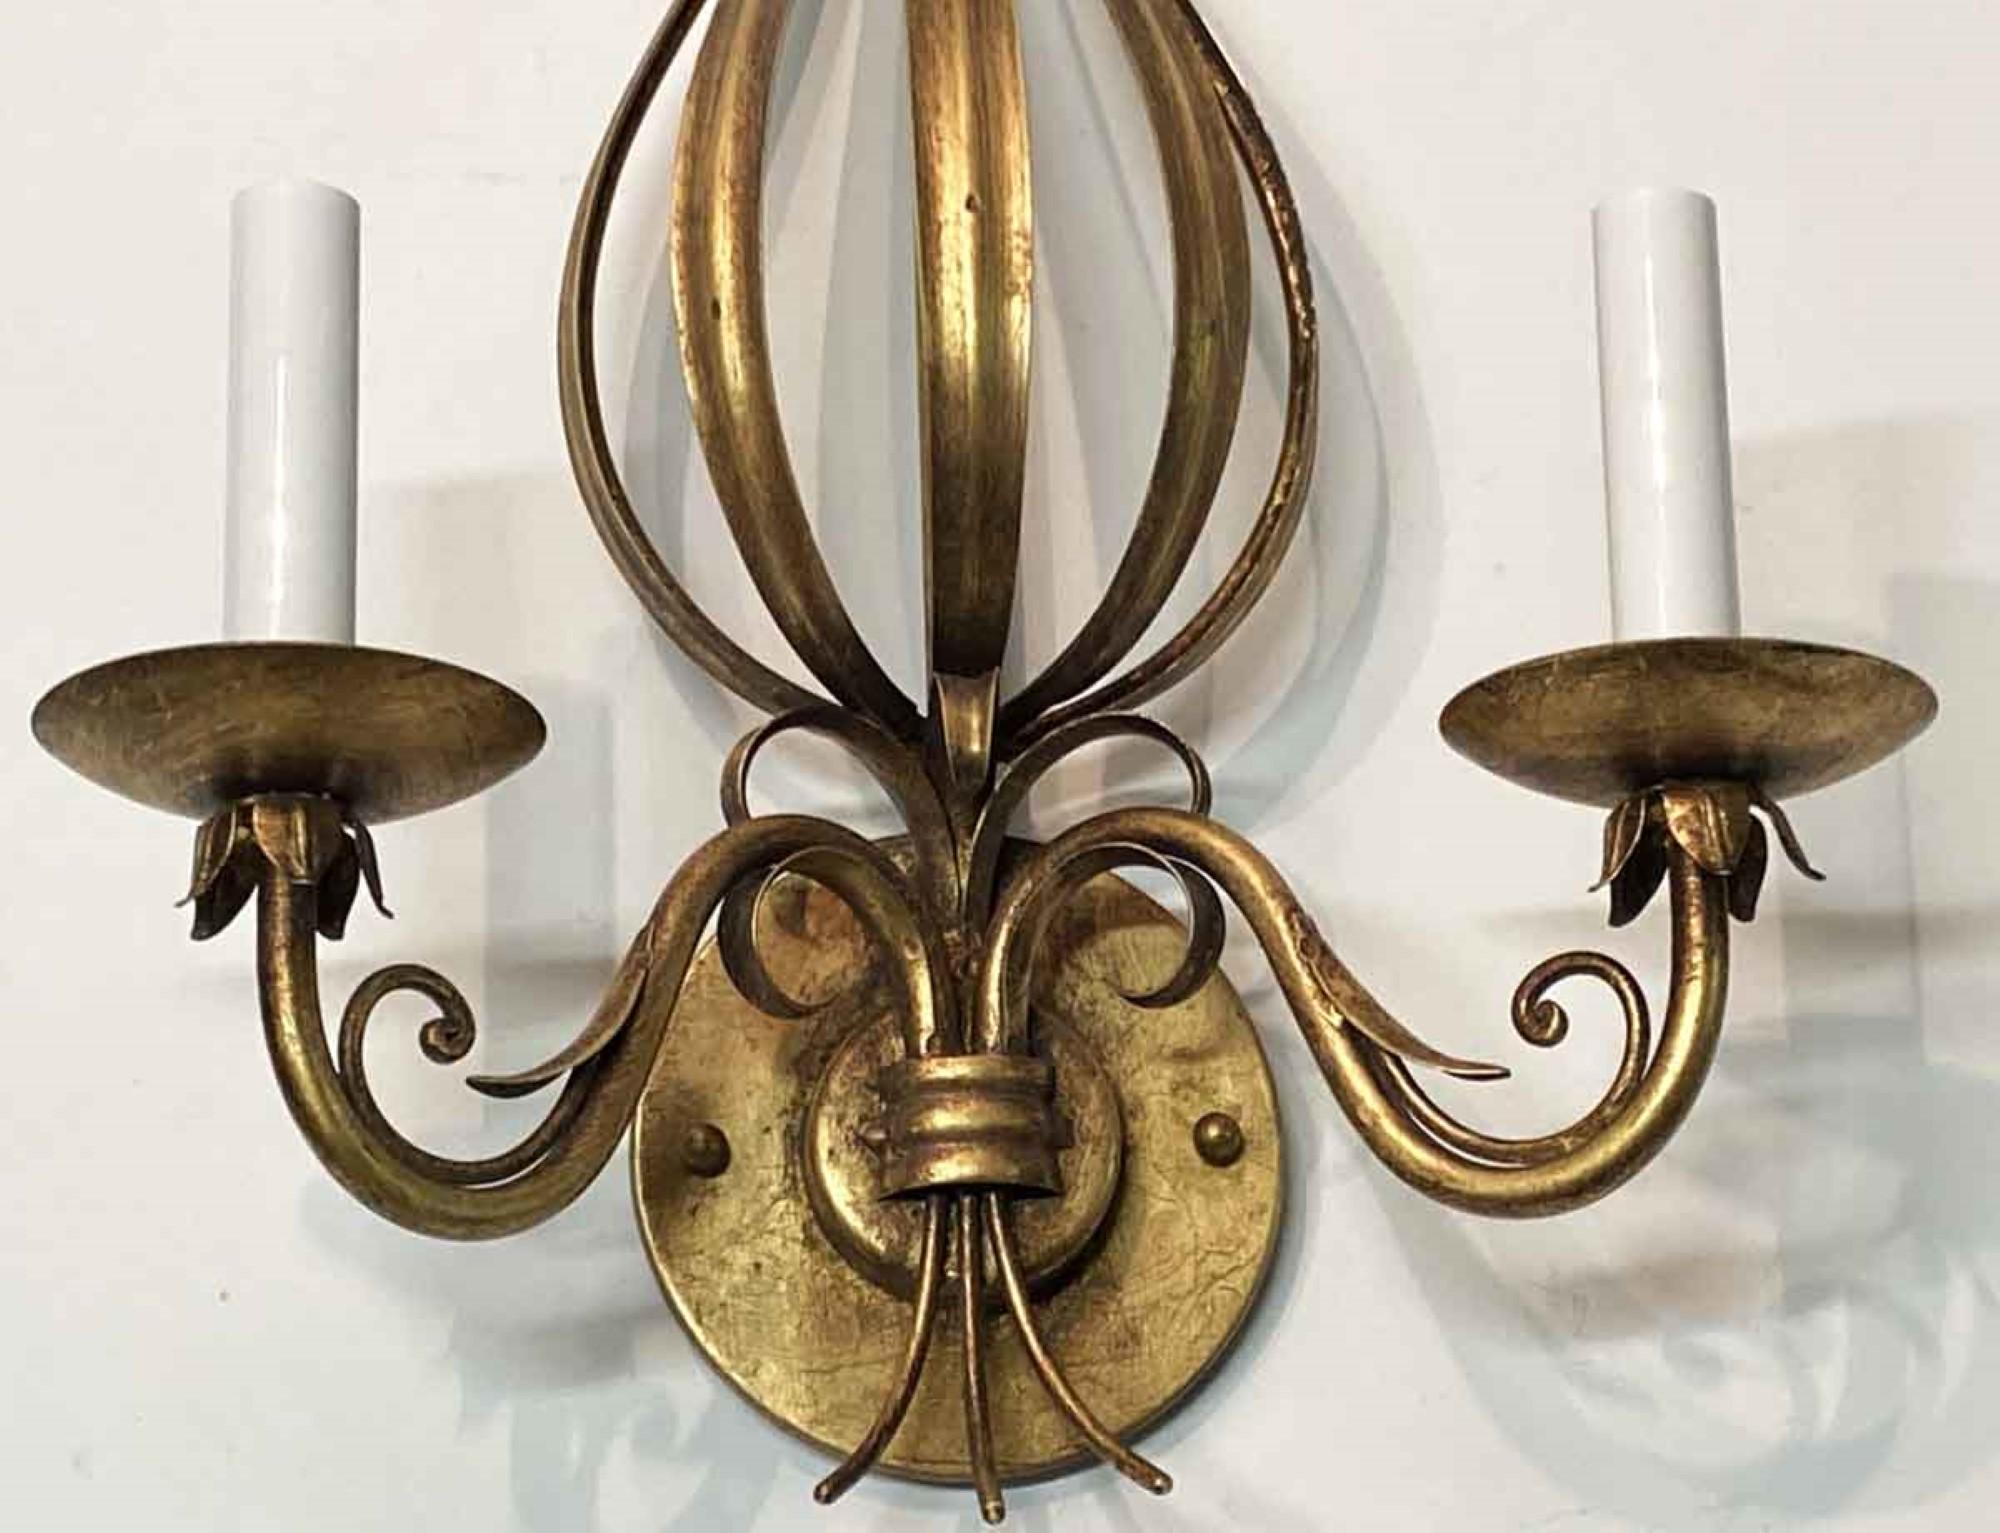 Late 20th Century 1990s Wrought Iron Foliage Gold Gilt Wall Sconce Done in a Florentine Style